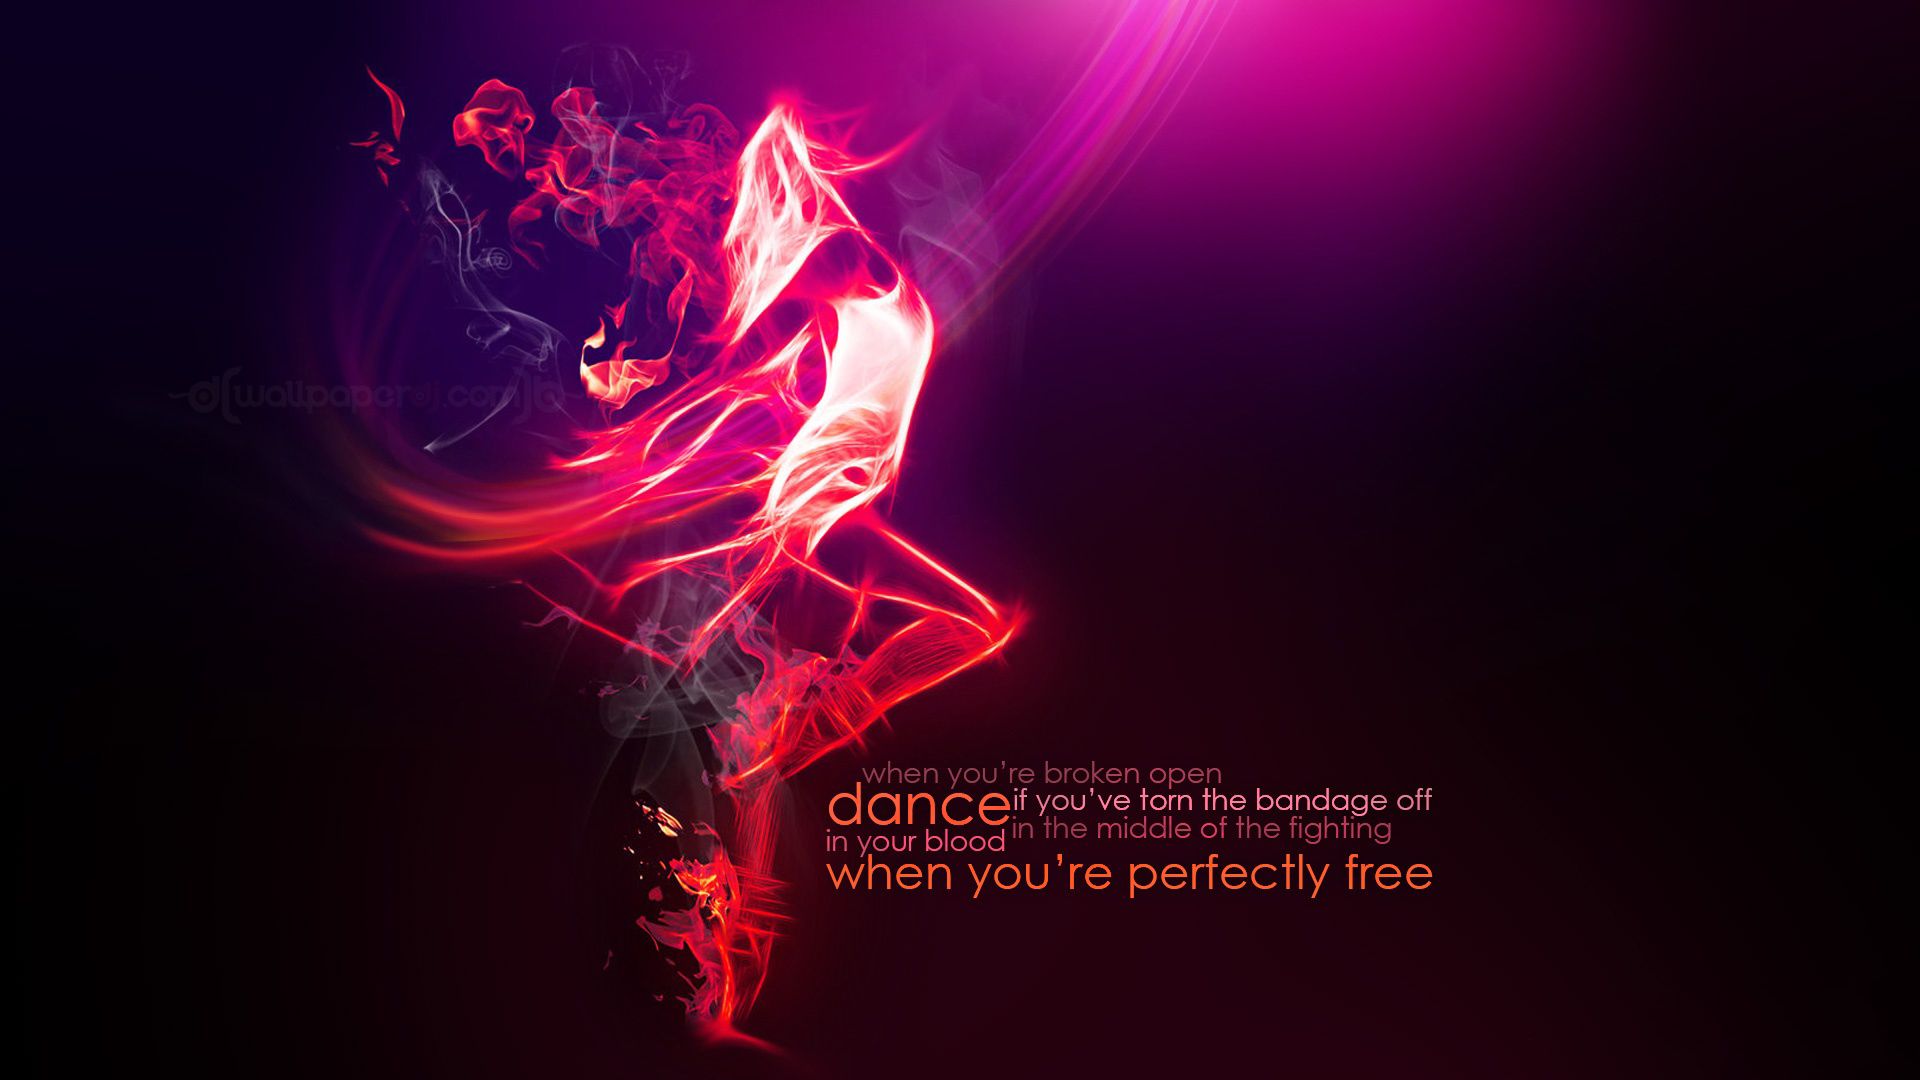 A beautiful wallpaper with a quote about dance - Dance